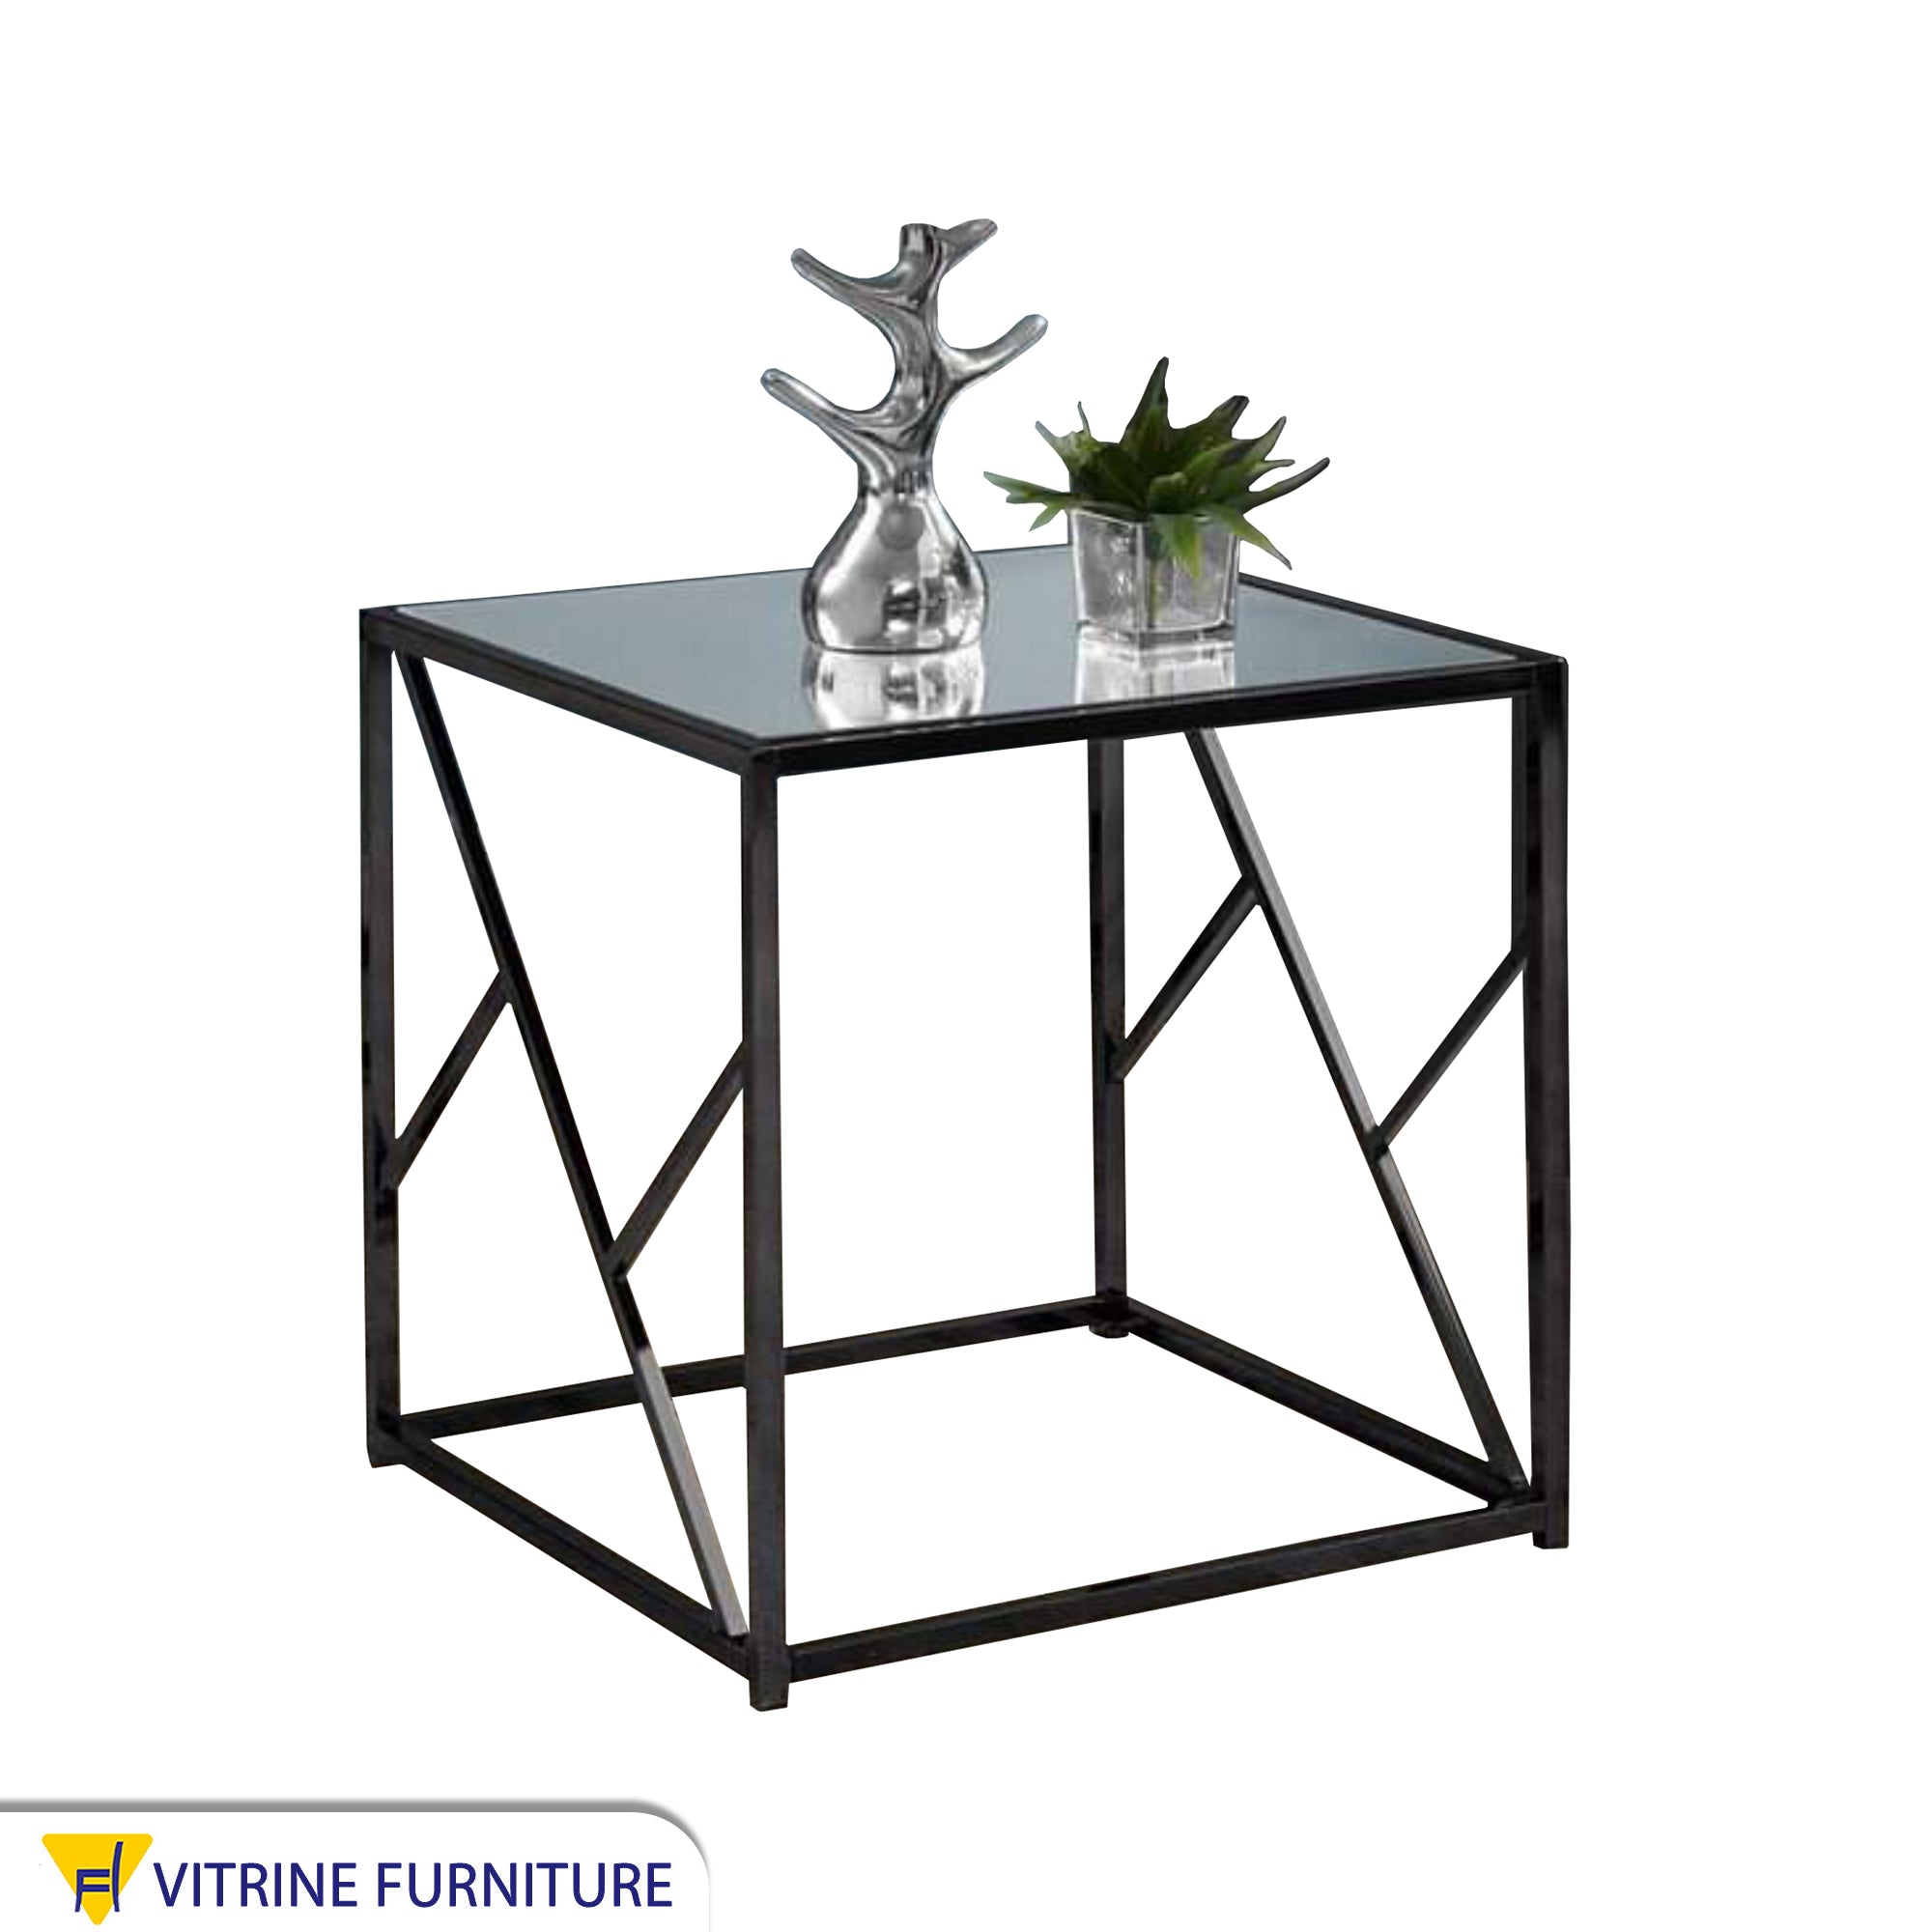 Side table with modern design